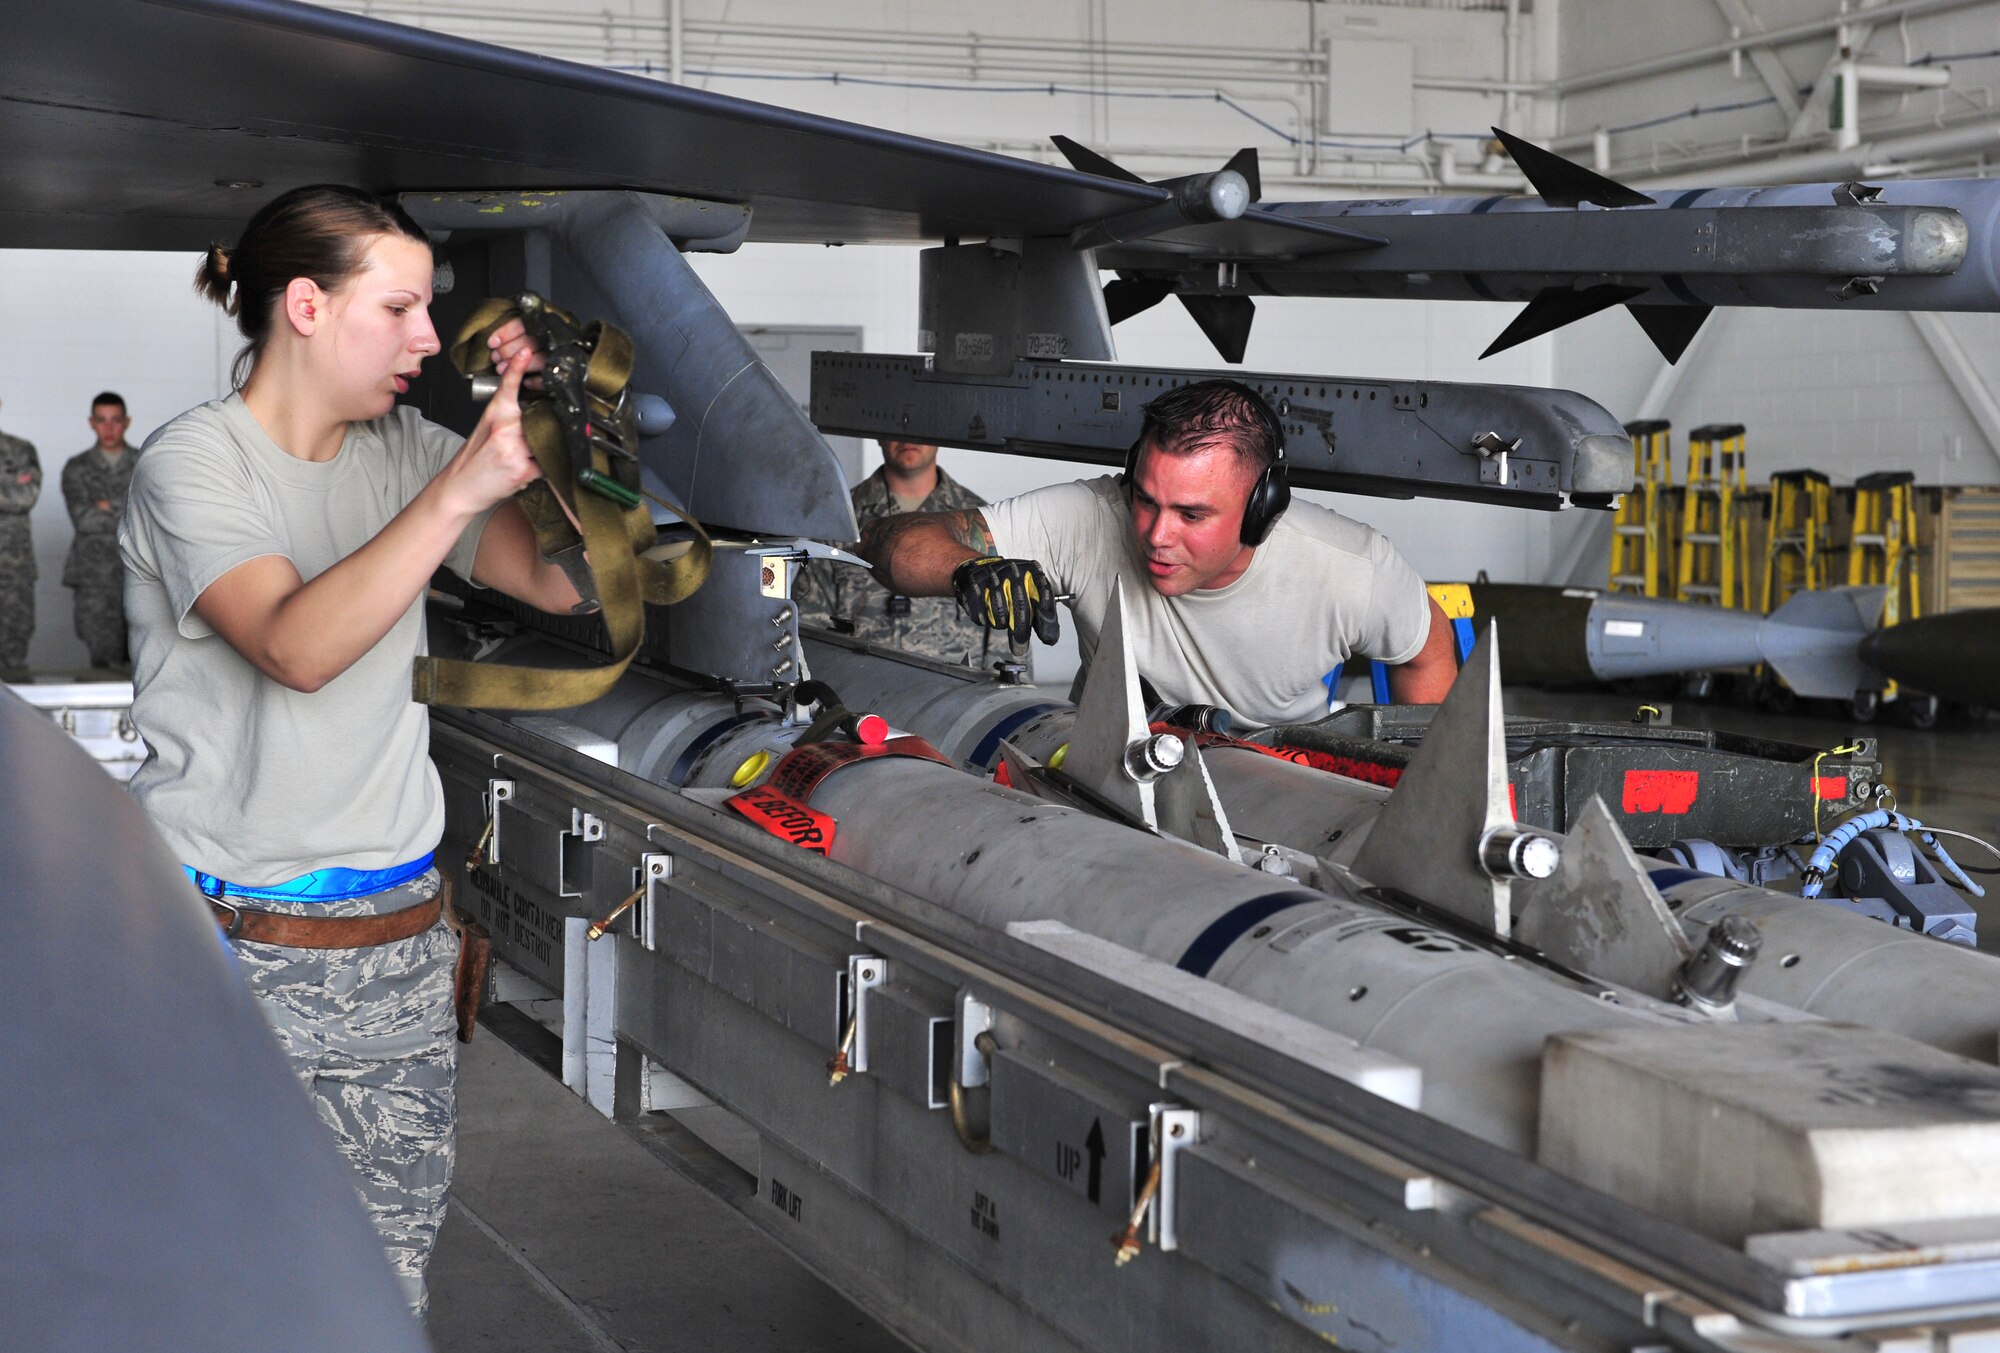 100416-F-8430J-129
SHAW AIR FORCE BASE, S.C. -- Airman 1st Class Nicole Nuemann (left) and Staff Sgt. Christopher Benton Jr., 55th Aircraft Maintenance Unit, secures a missile to the F-16 April 16, 2010. Wing weapons standardization held the first Weapons Load Crew of the Quarter Competition for 2010. The 55th and 79th Aircraft Maintenance Units Weapons load crews competed against each other in a race against time. Both load crews were tasked to load two air intercept missiles (AIM - 120) and two air-to-ground missiles (AGM - 88) within 45 minutes.   (U.S. Air Force photo/Airman 1st Class Amber E. N. Jacobs)